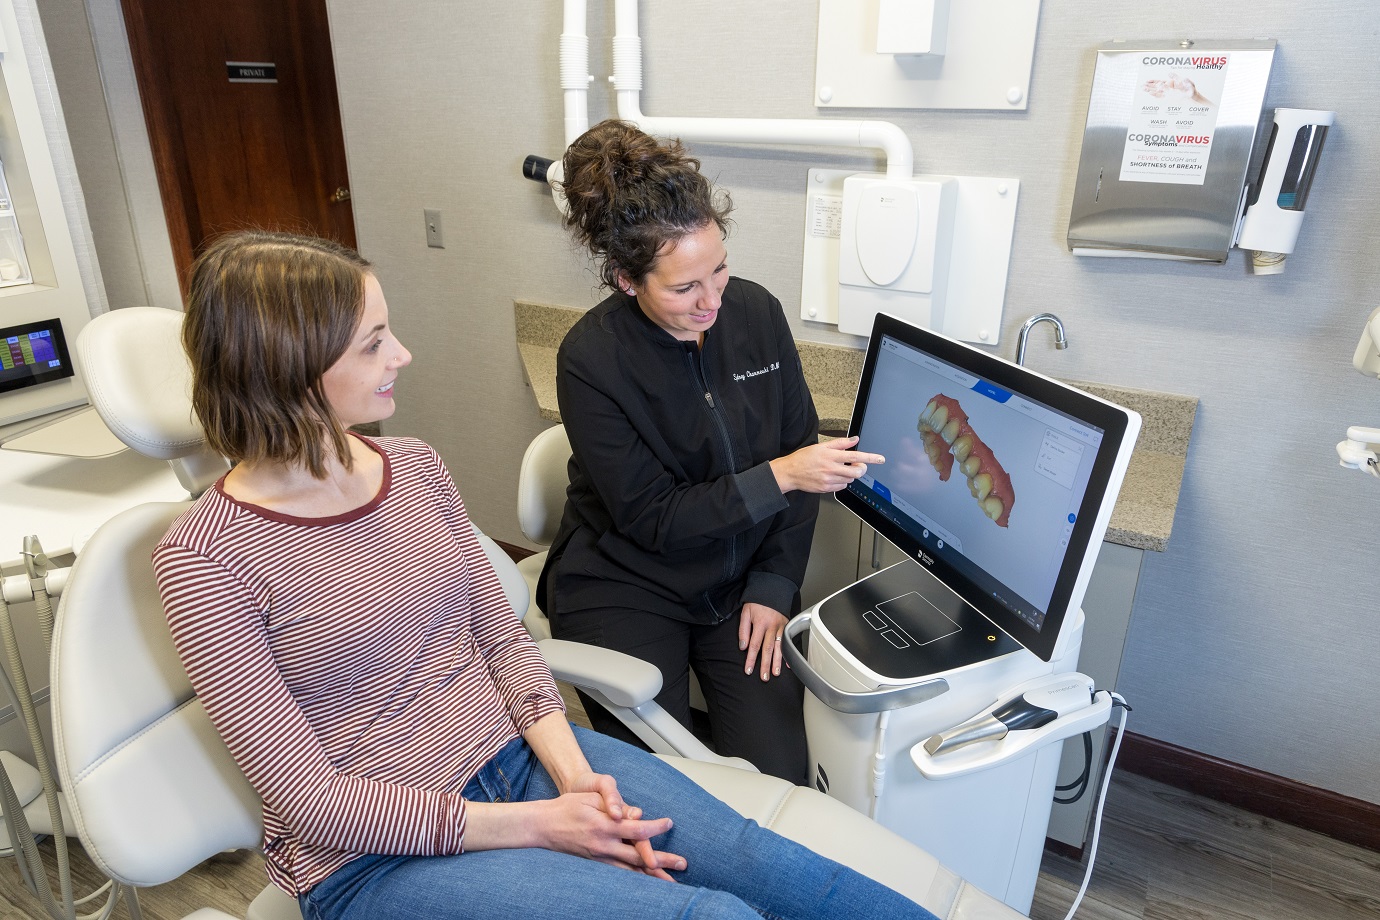 A dentist is showing something on the screen to her patient